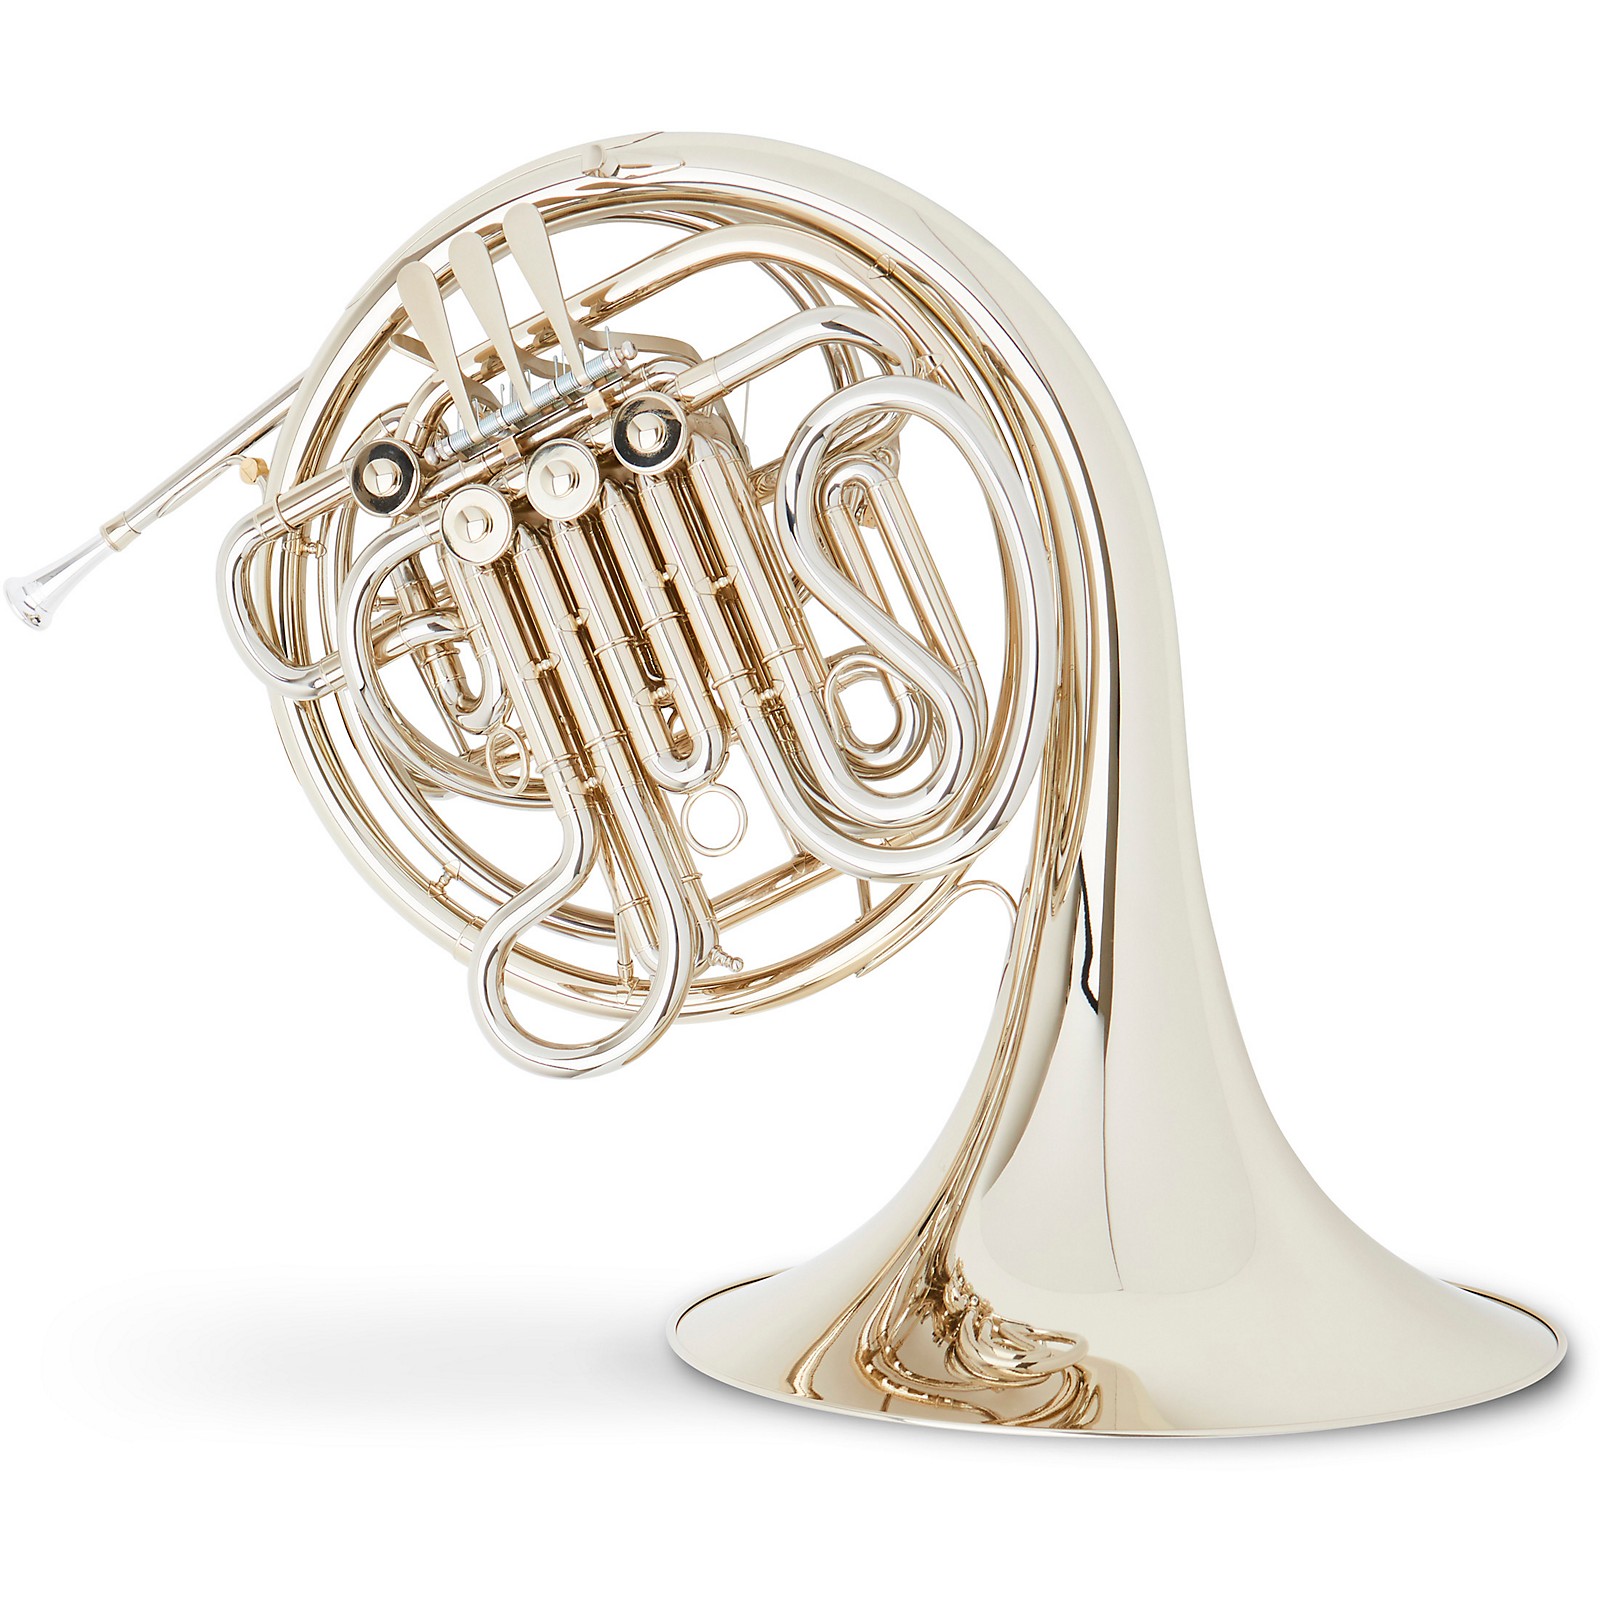 Holton H179 Farkas Series Fixed Bell Double Horn | Music u0026 Arts